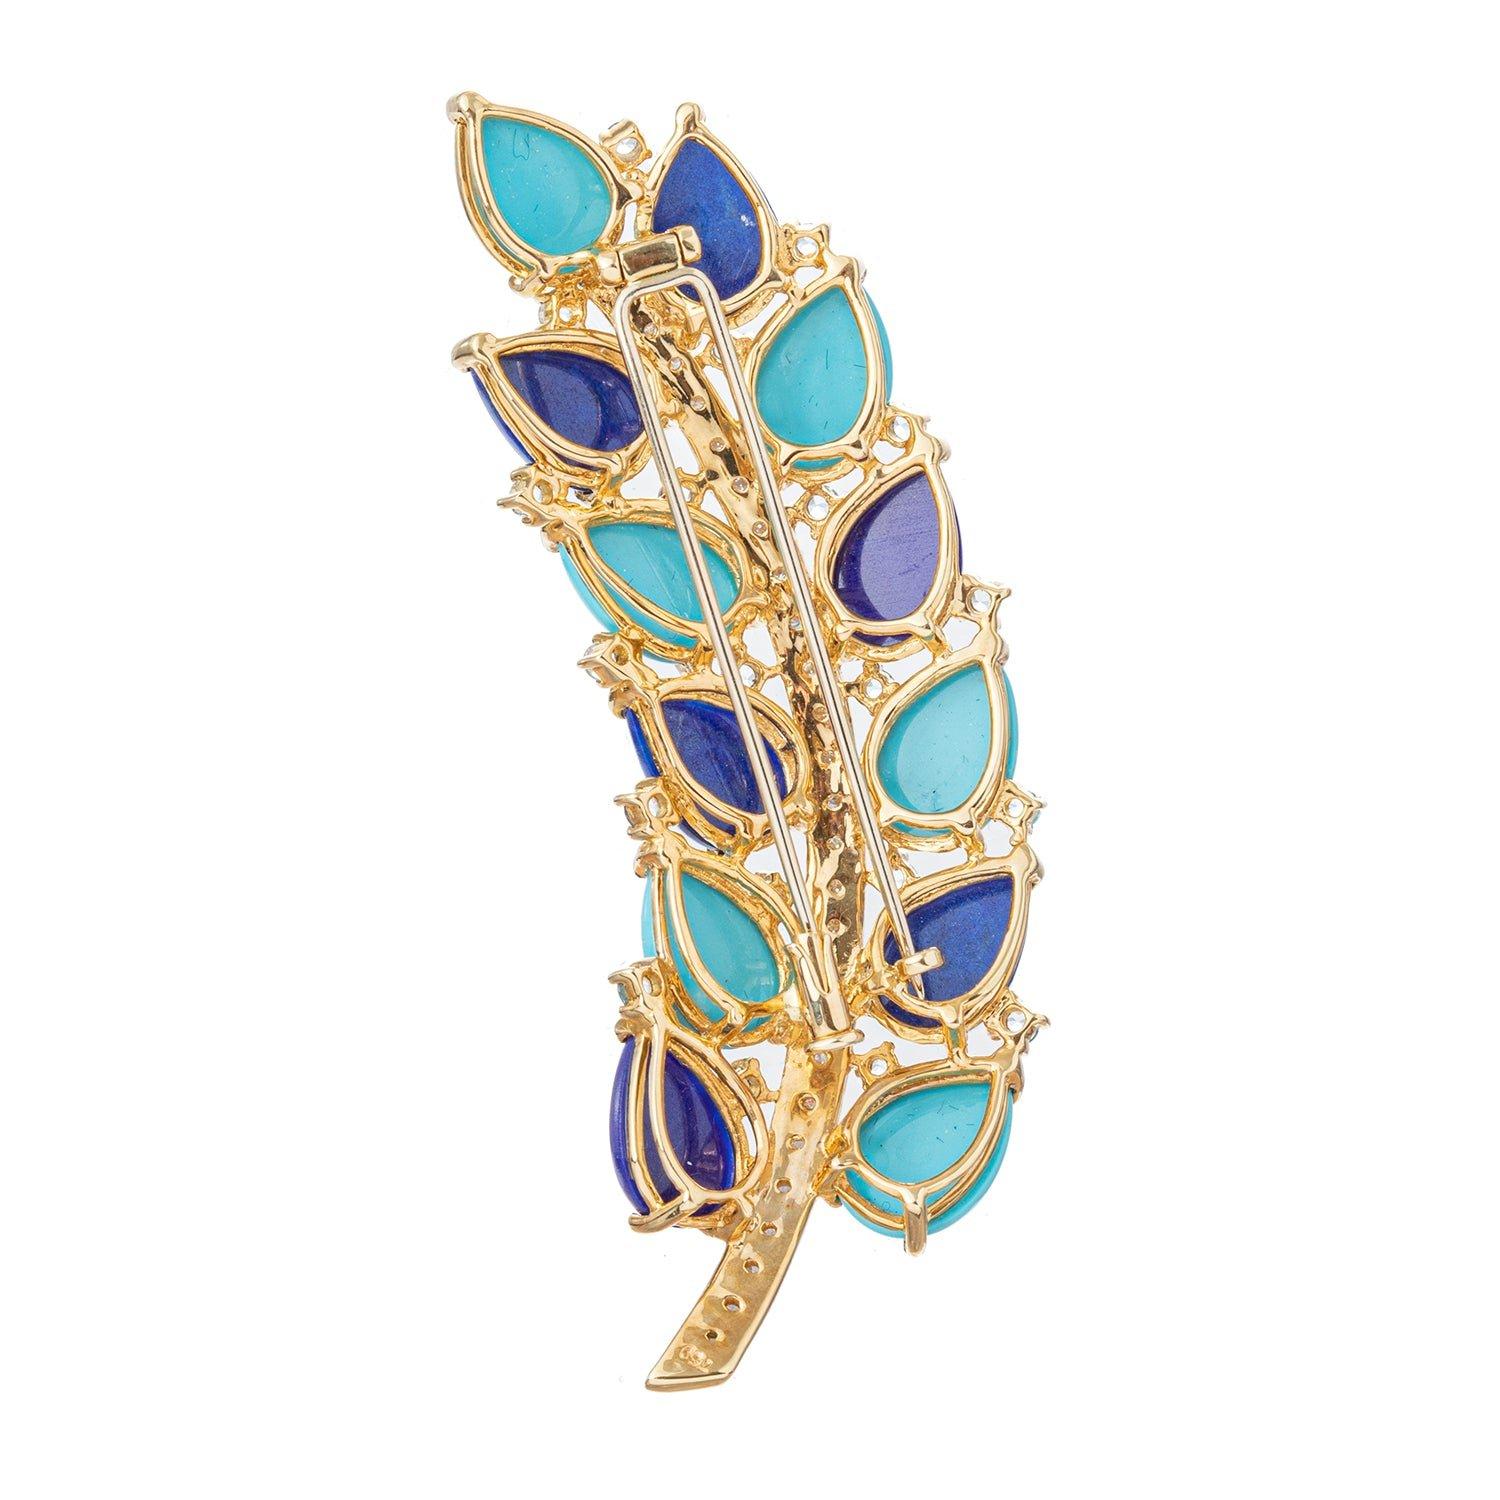 Leaf pin in 18k yellow gold, featuring larger pear-shaped cabochon turquoise and lapis interspersed with round-cut aquamarine accents, the stem of the leaf set with round brilliant-cut diamonds.  26 round brilliant-cut diamonds weighing